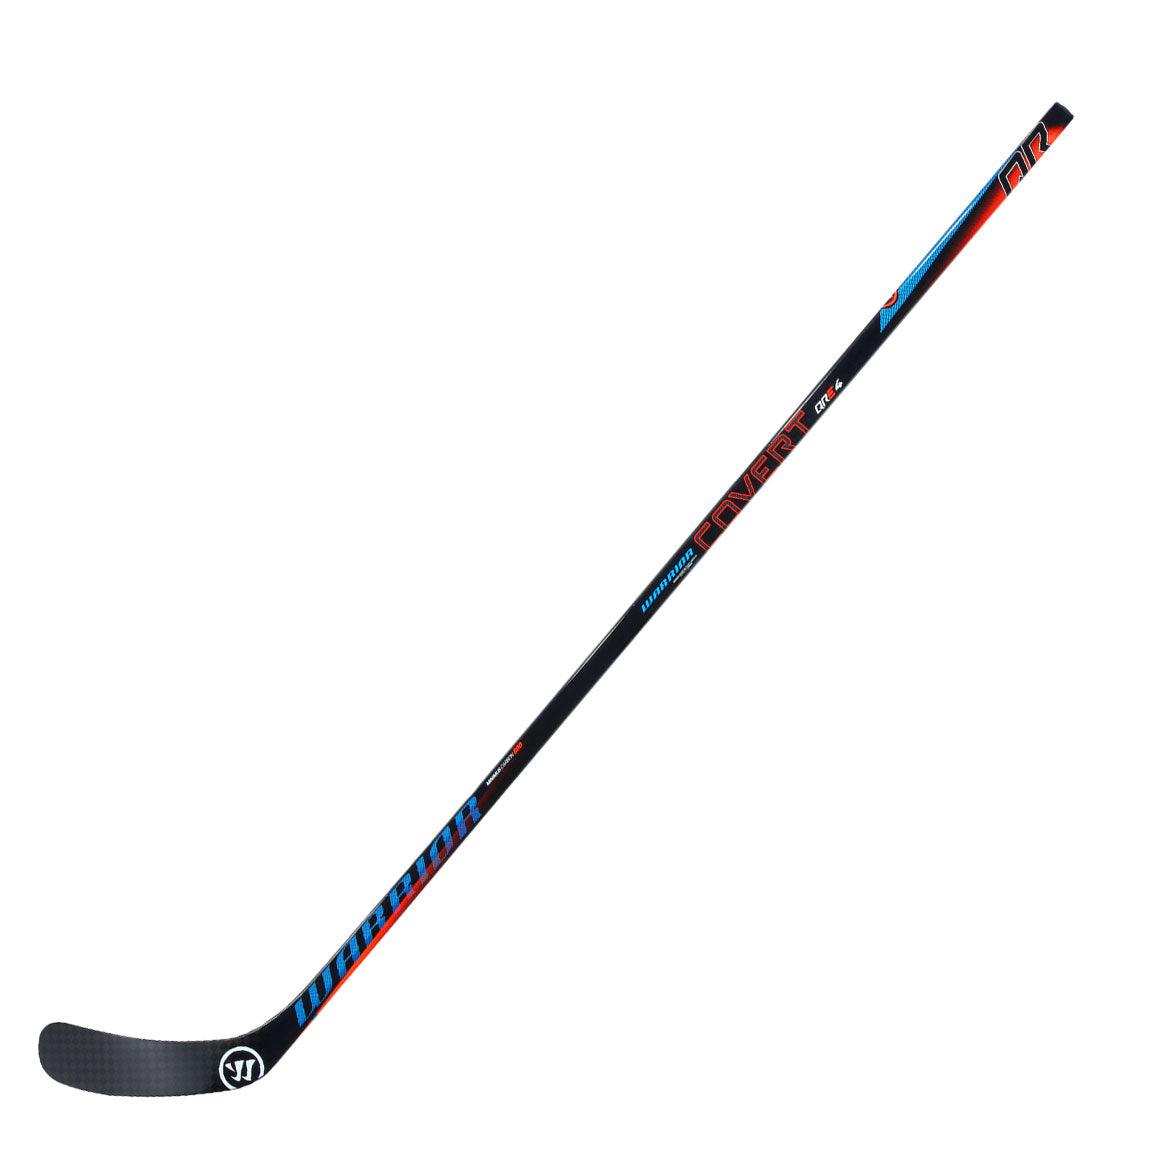 Covert QRE 4 Hockey Stick - Junior - Sports Excellence